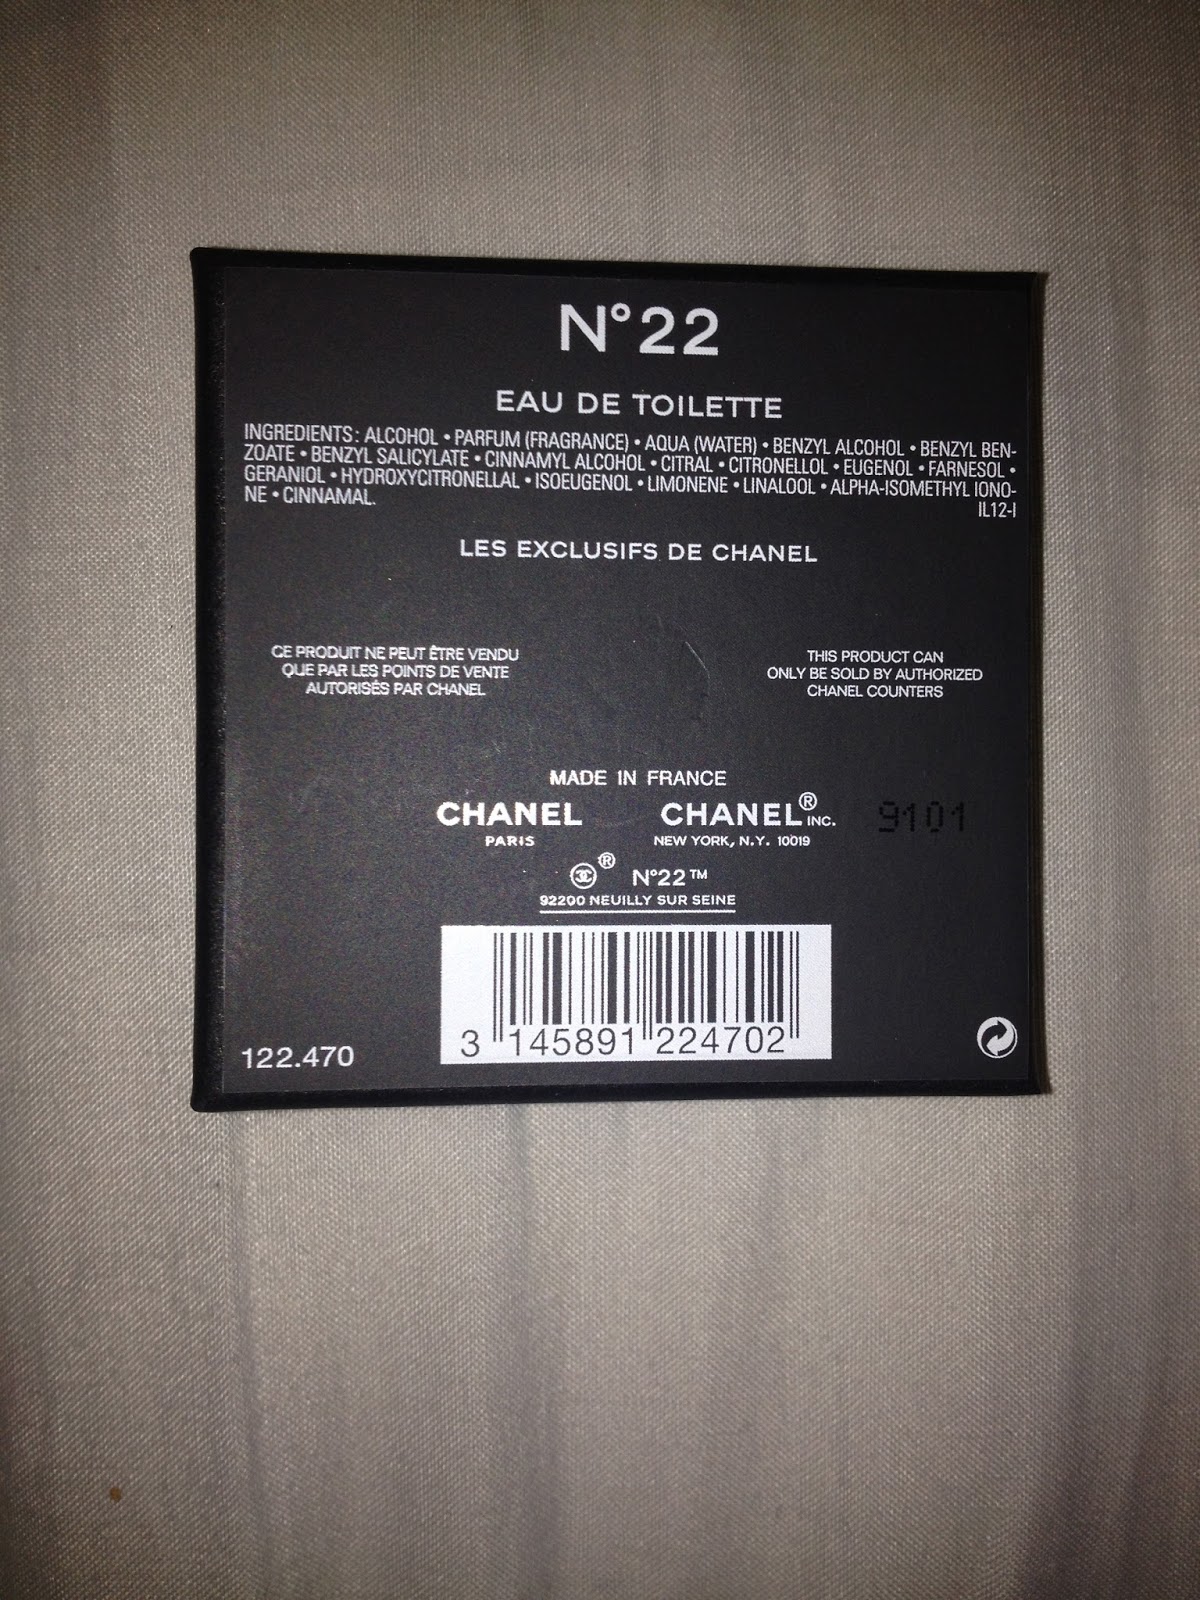 The Makeup Junkie's Diary: Chanel No 22